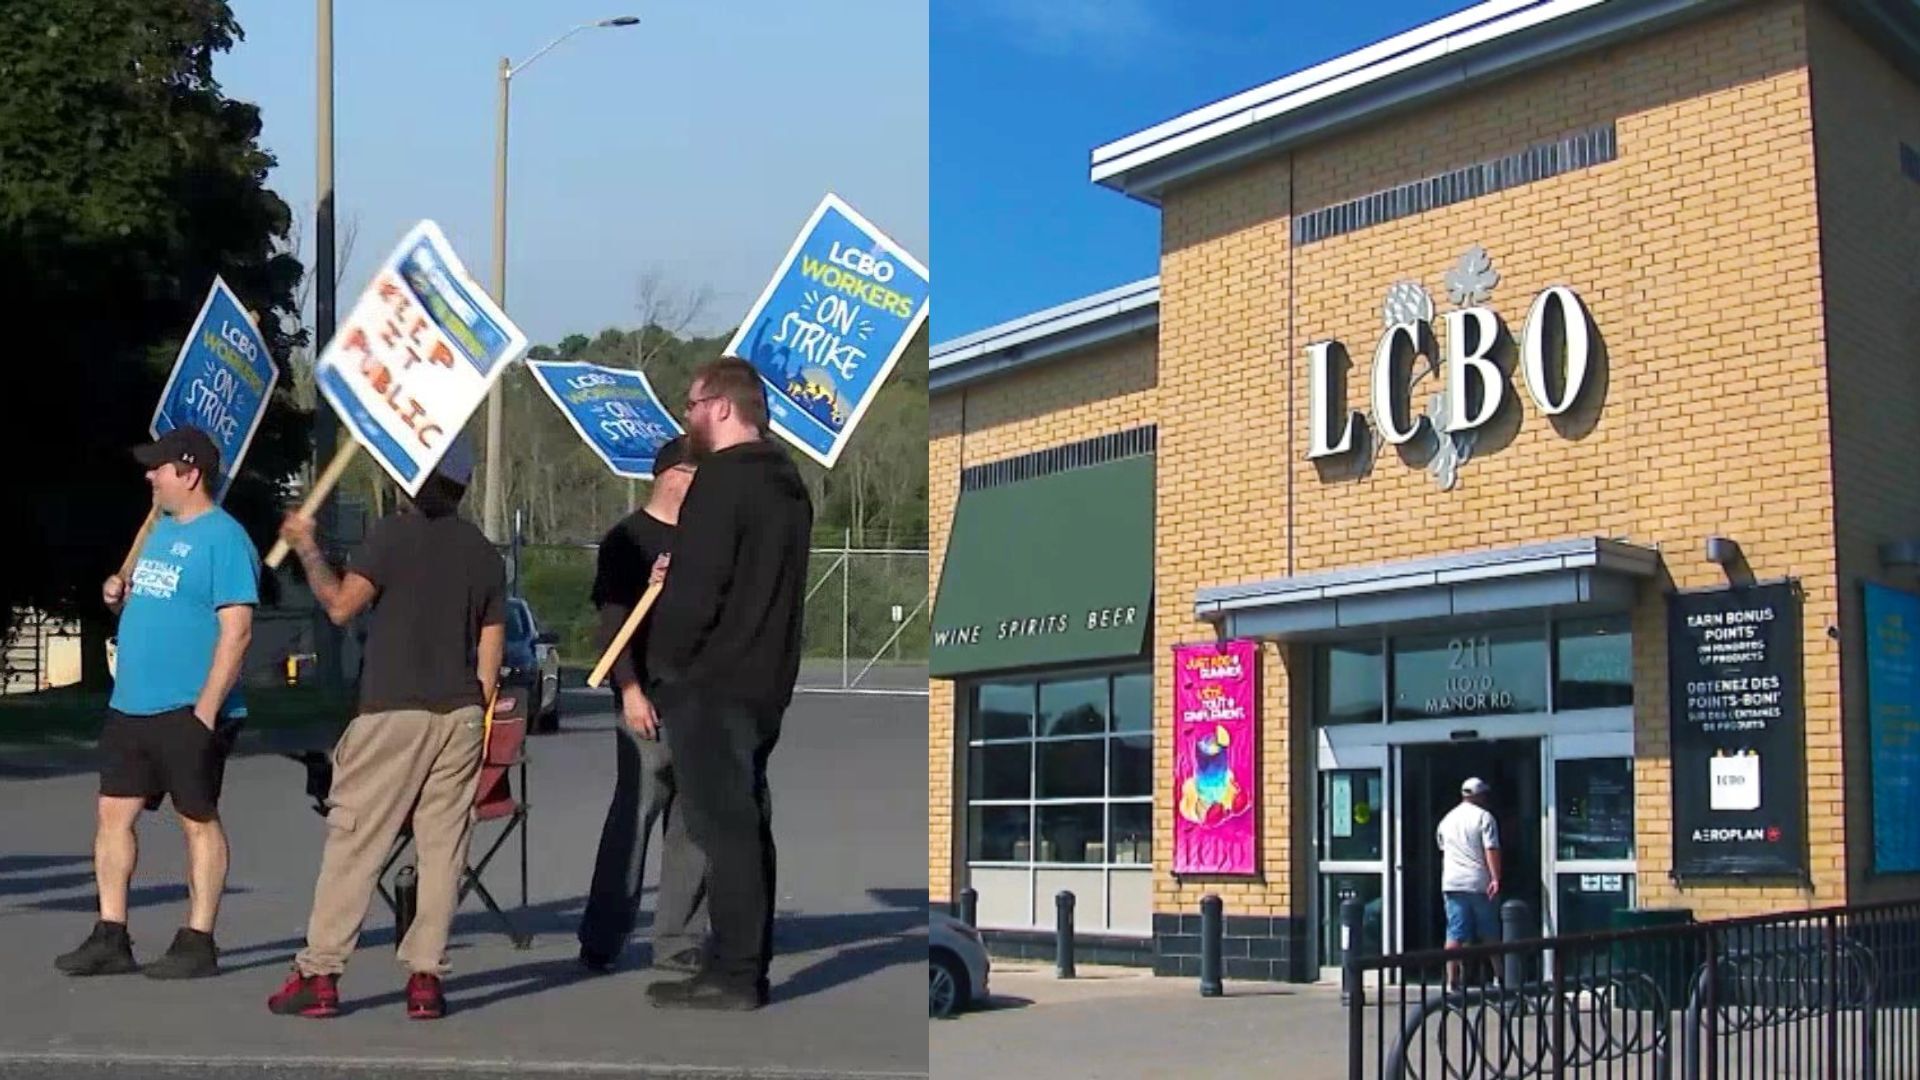 We just asked an LCBO employee what he thinks about the strike